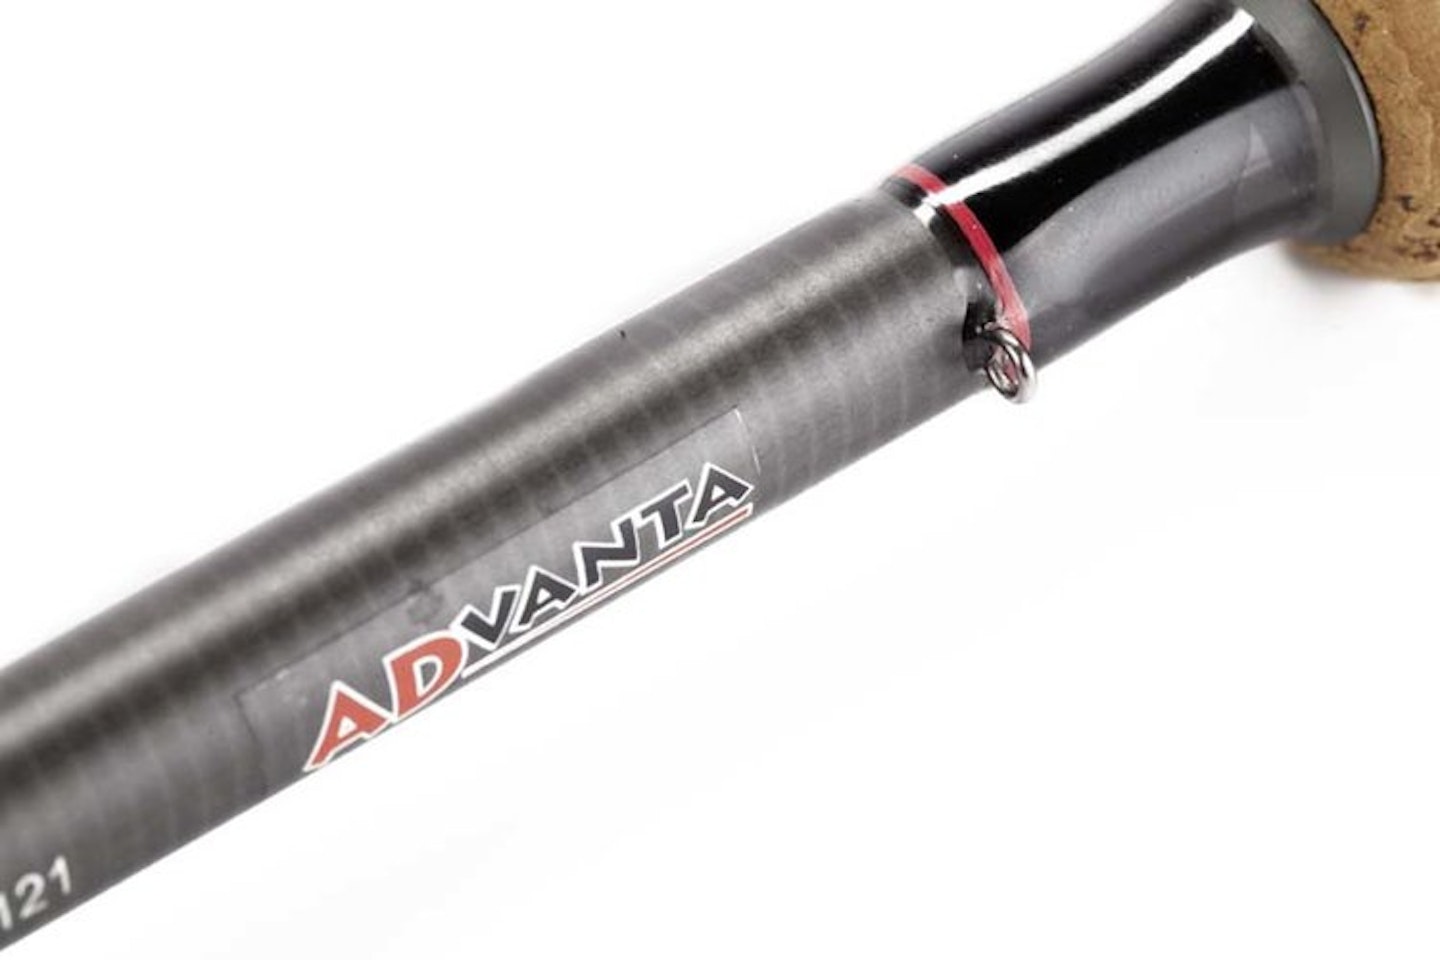 ANGLING DIRECT'S ADVANTA DISCOVERY RODS